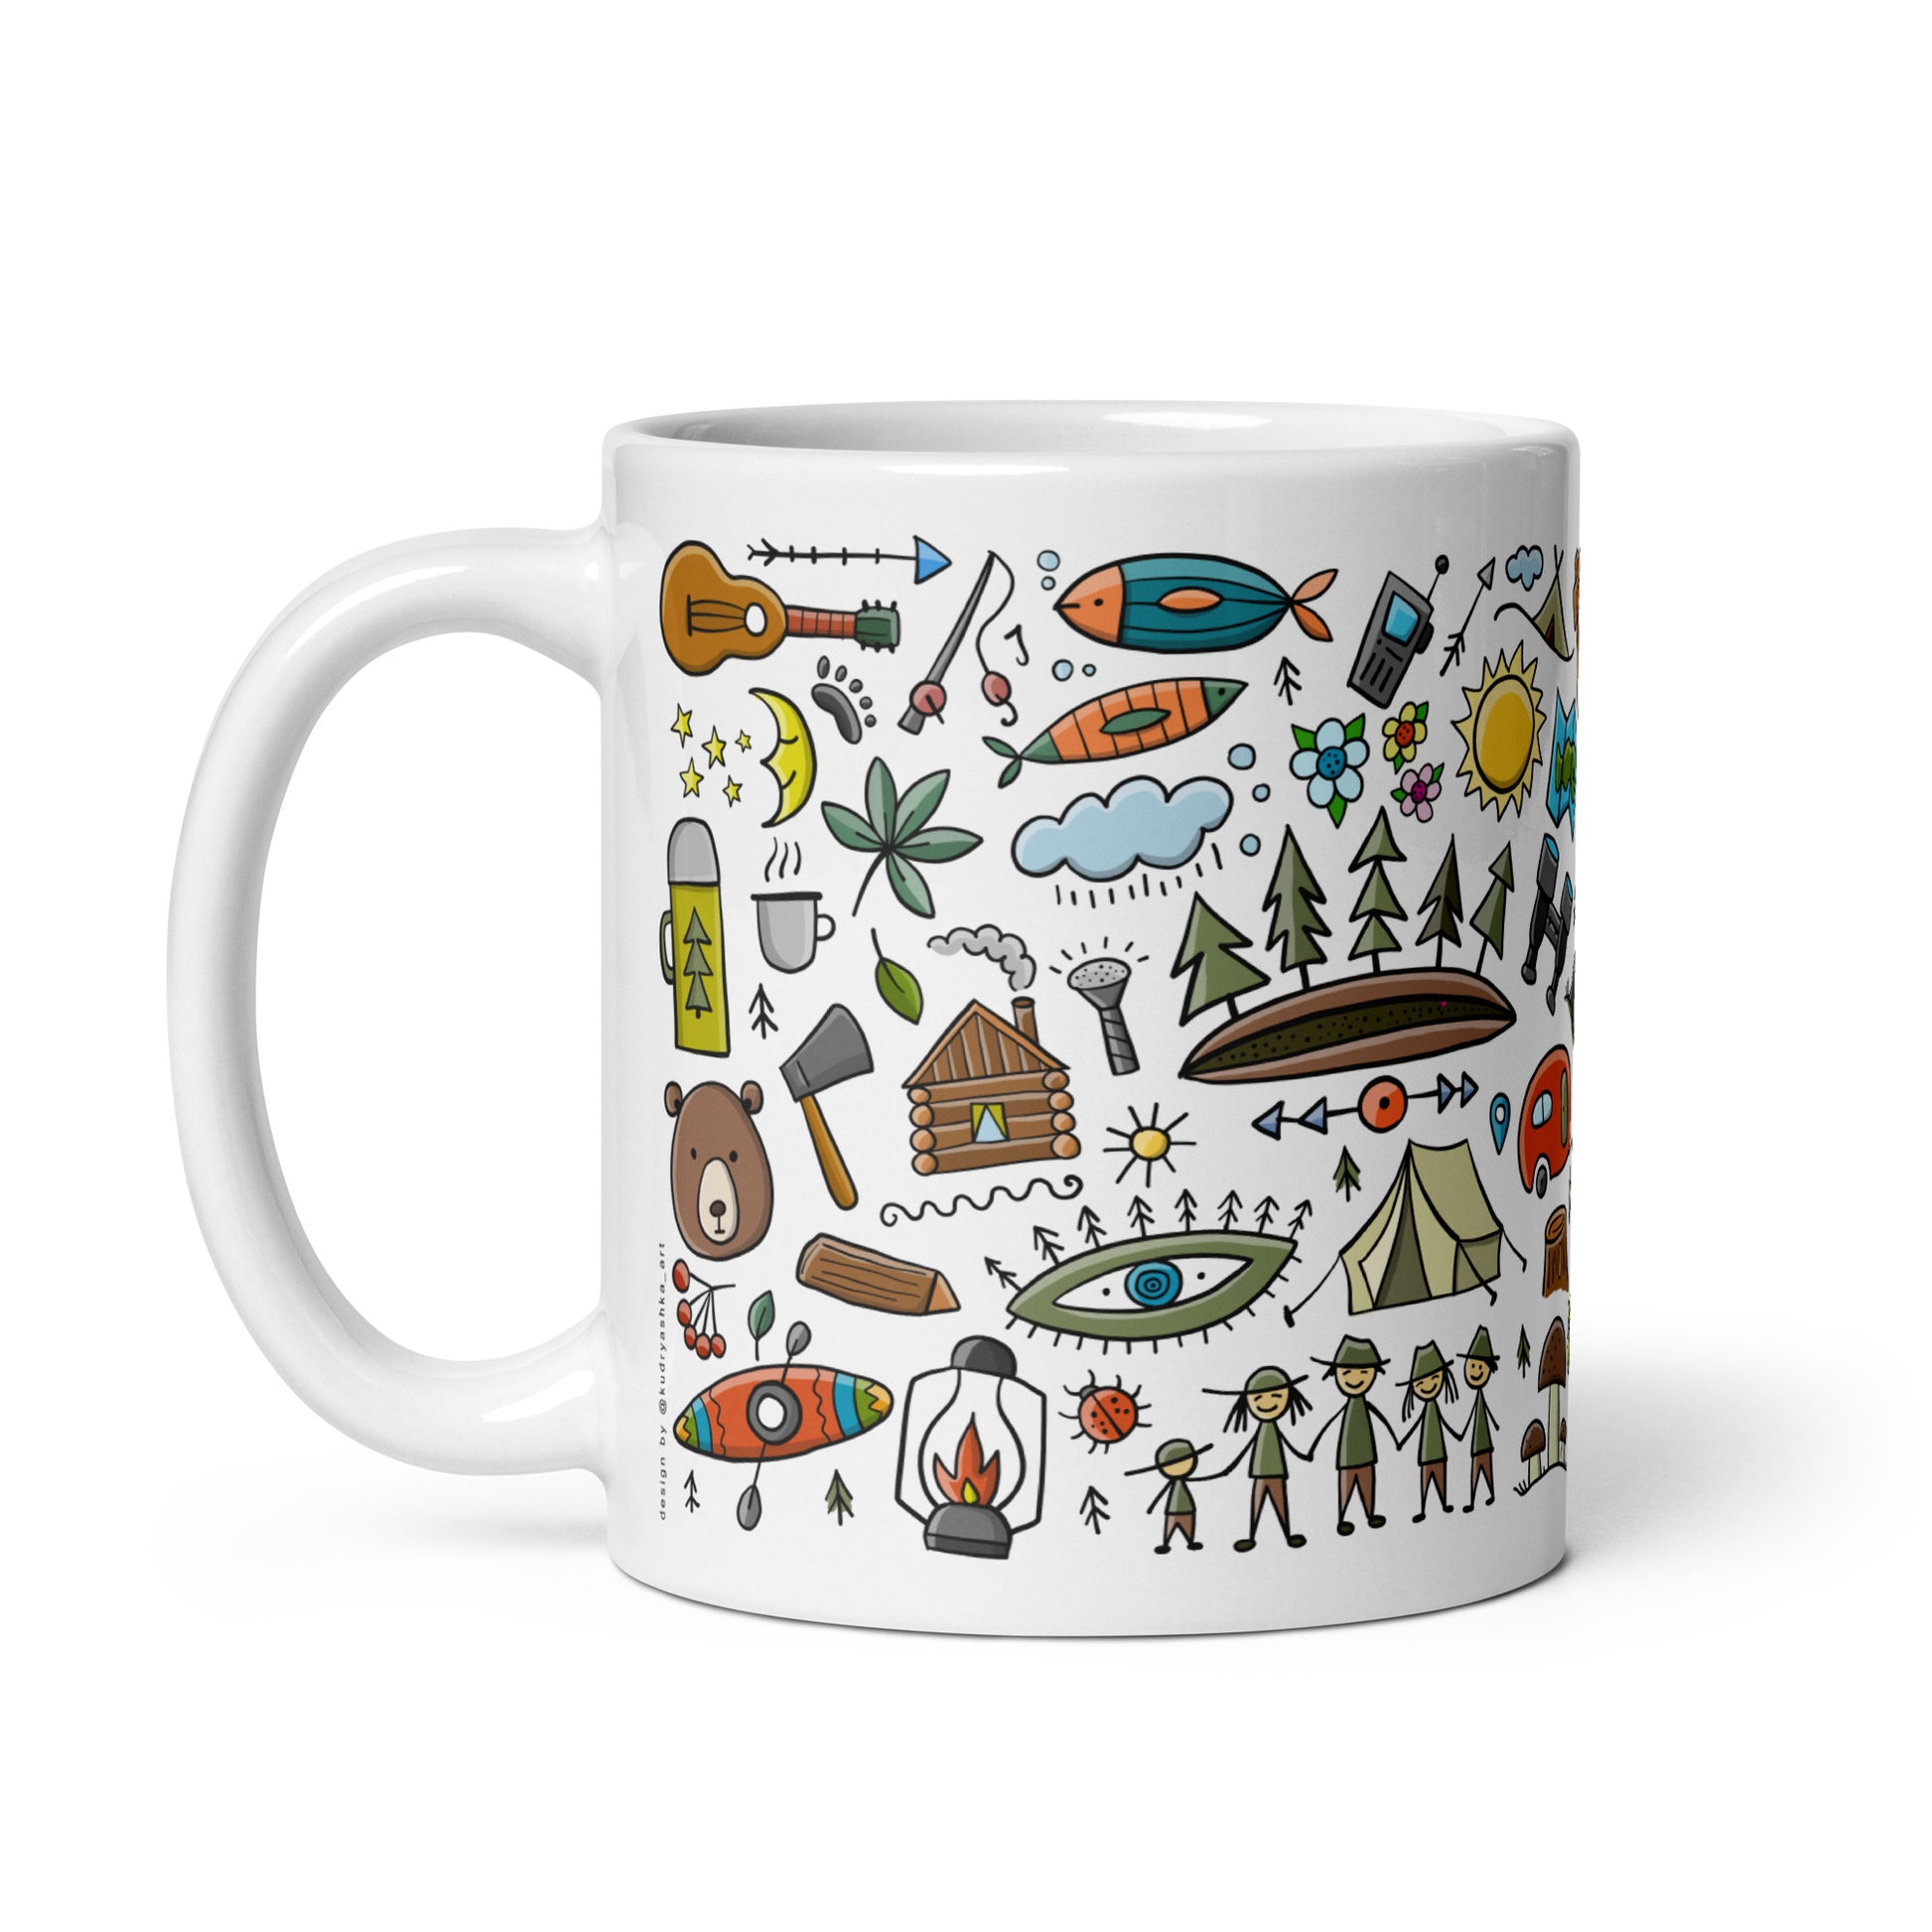 11 oz gift ceramic mug for camping and nature lovers. Basic text on mug: Camping therapy. Coffee in the Great Outdoors. The main text on the mug can be replaced for your own. Back side